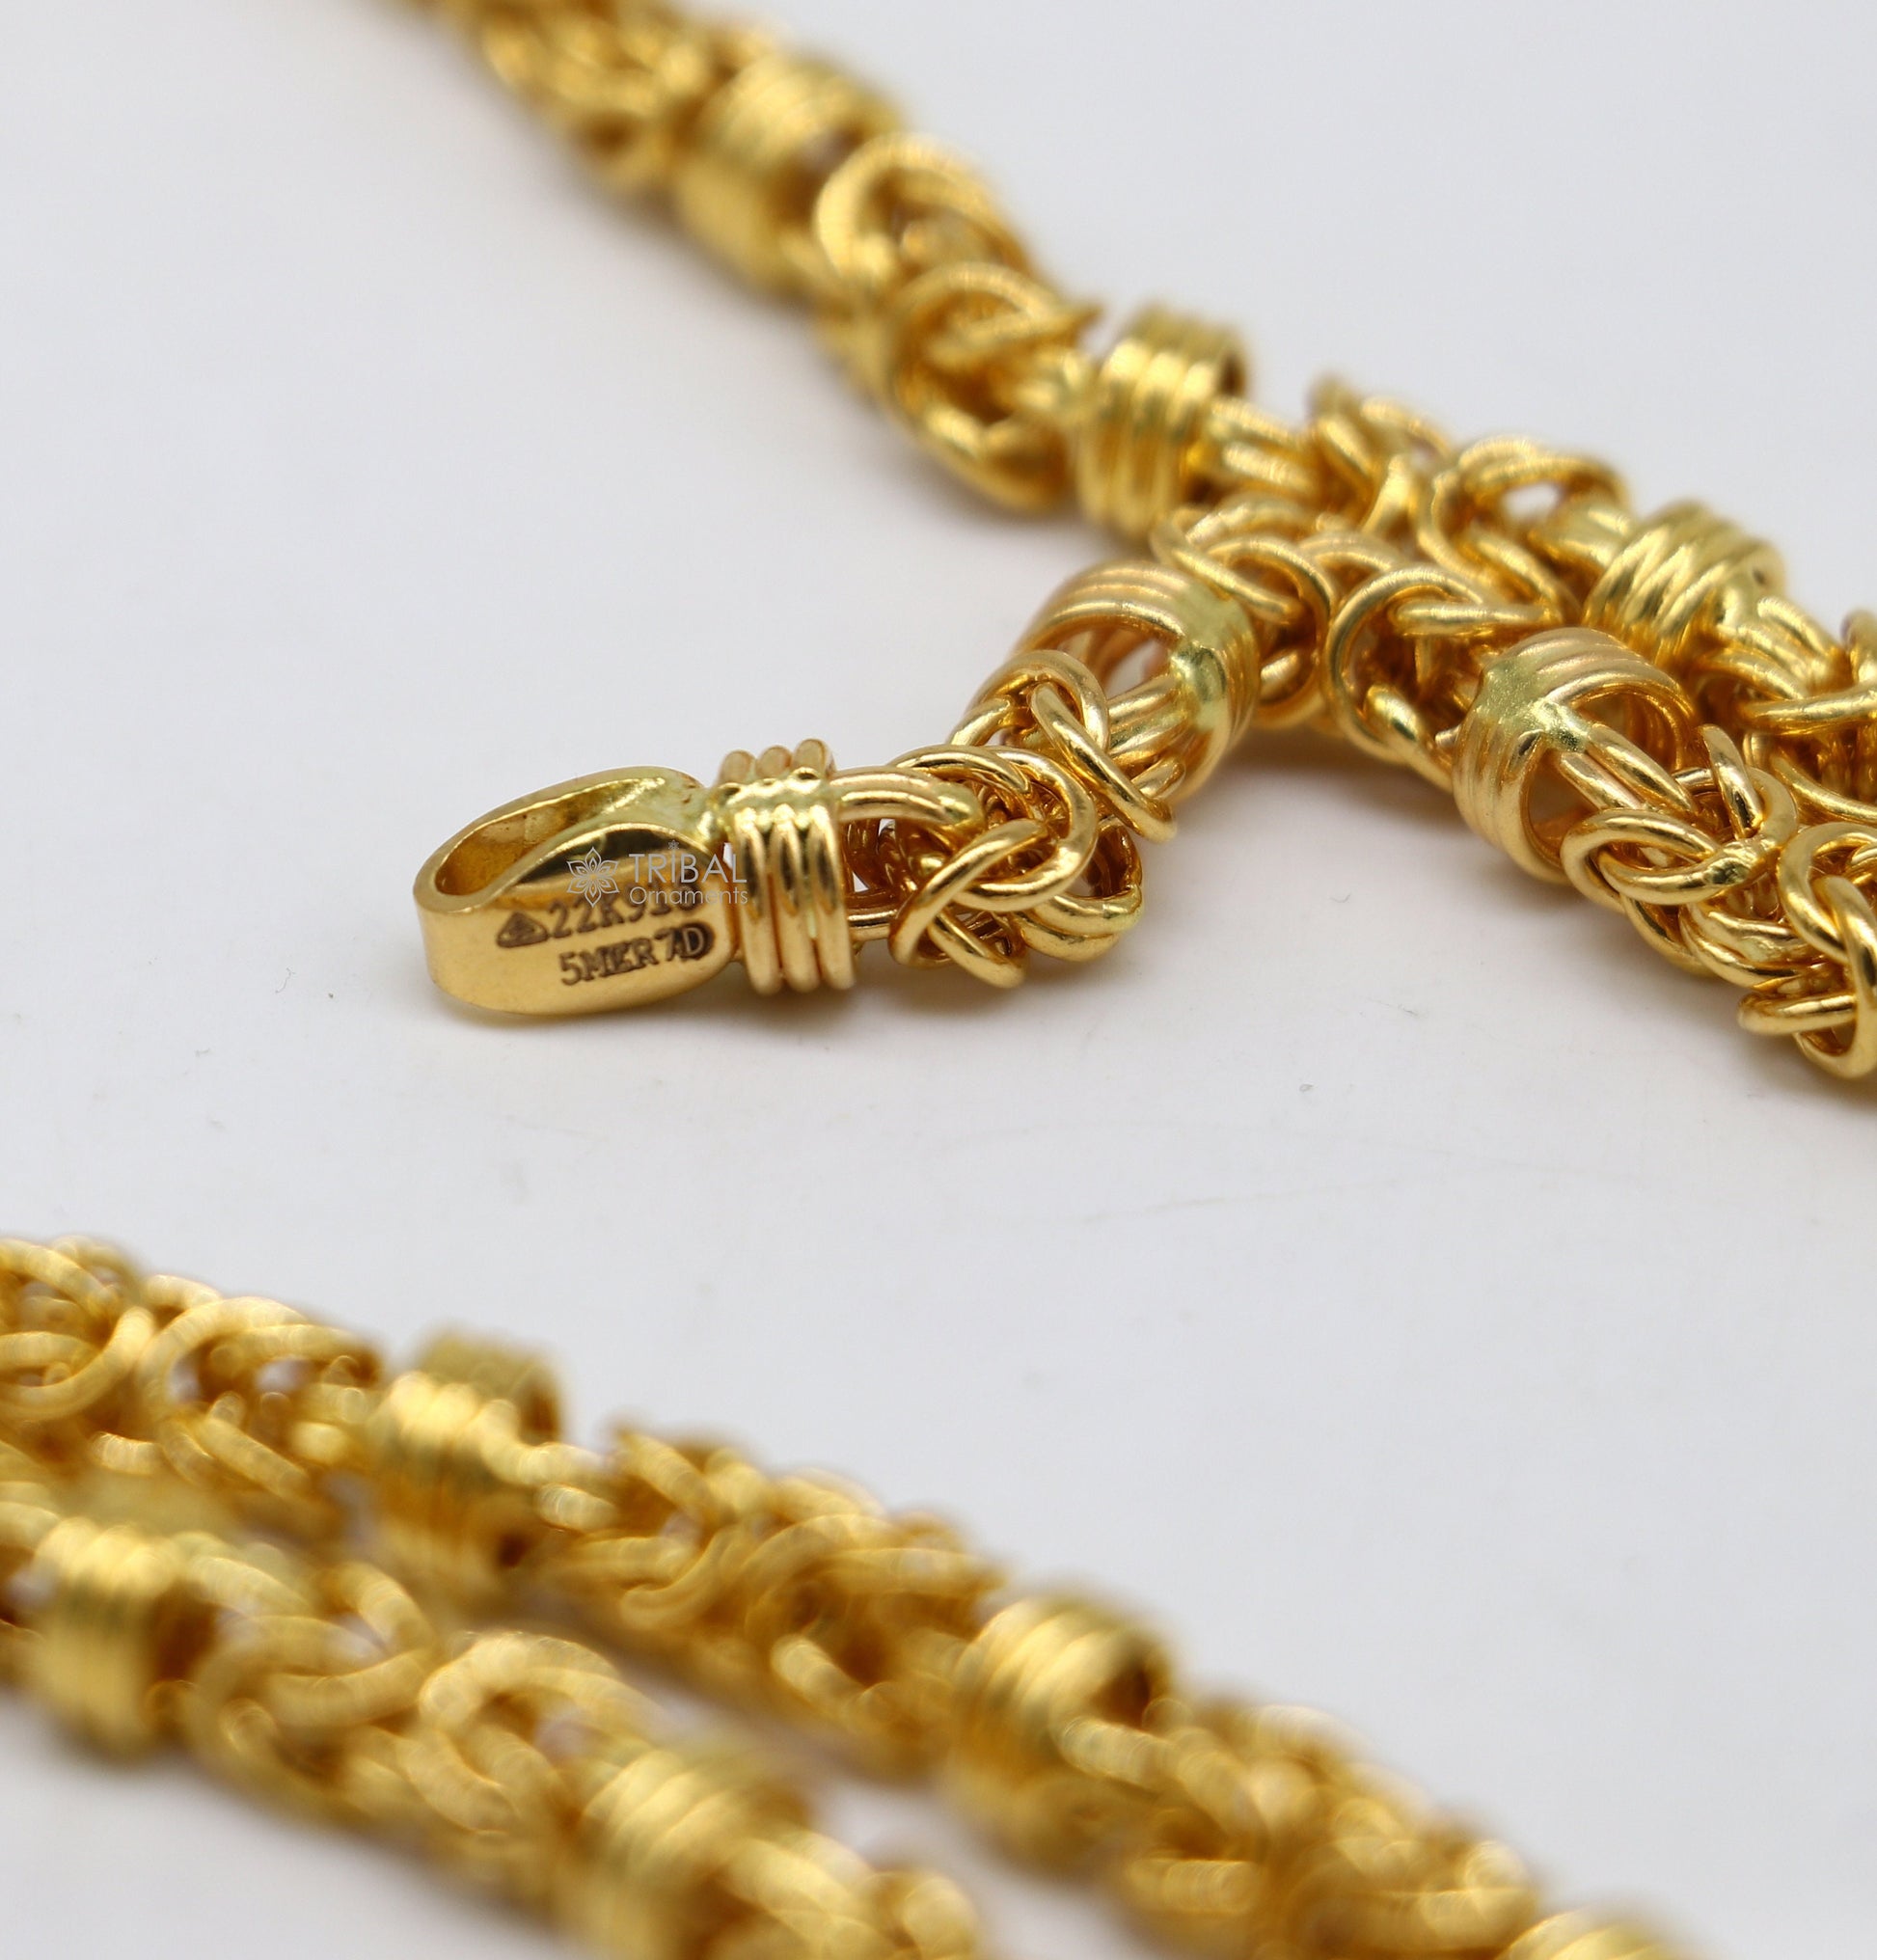 All size authentic hallmarked 22kt 22ct gold 20 to 26 inches long handmade fabulous byzantine stylish chain necklace unisex gifting gch588 - TRIBAL ORNAMENTS